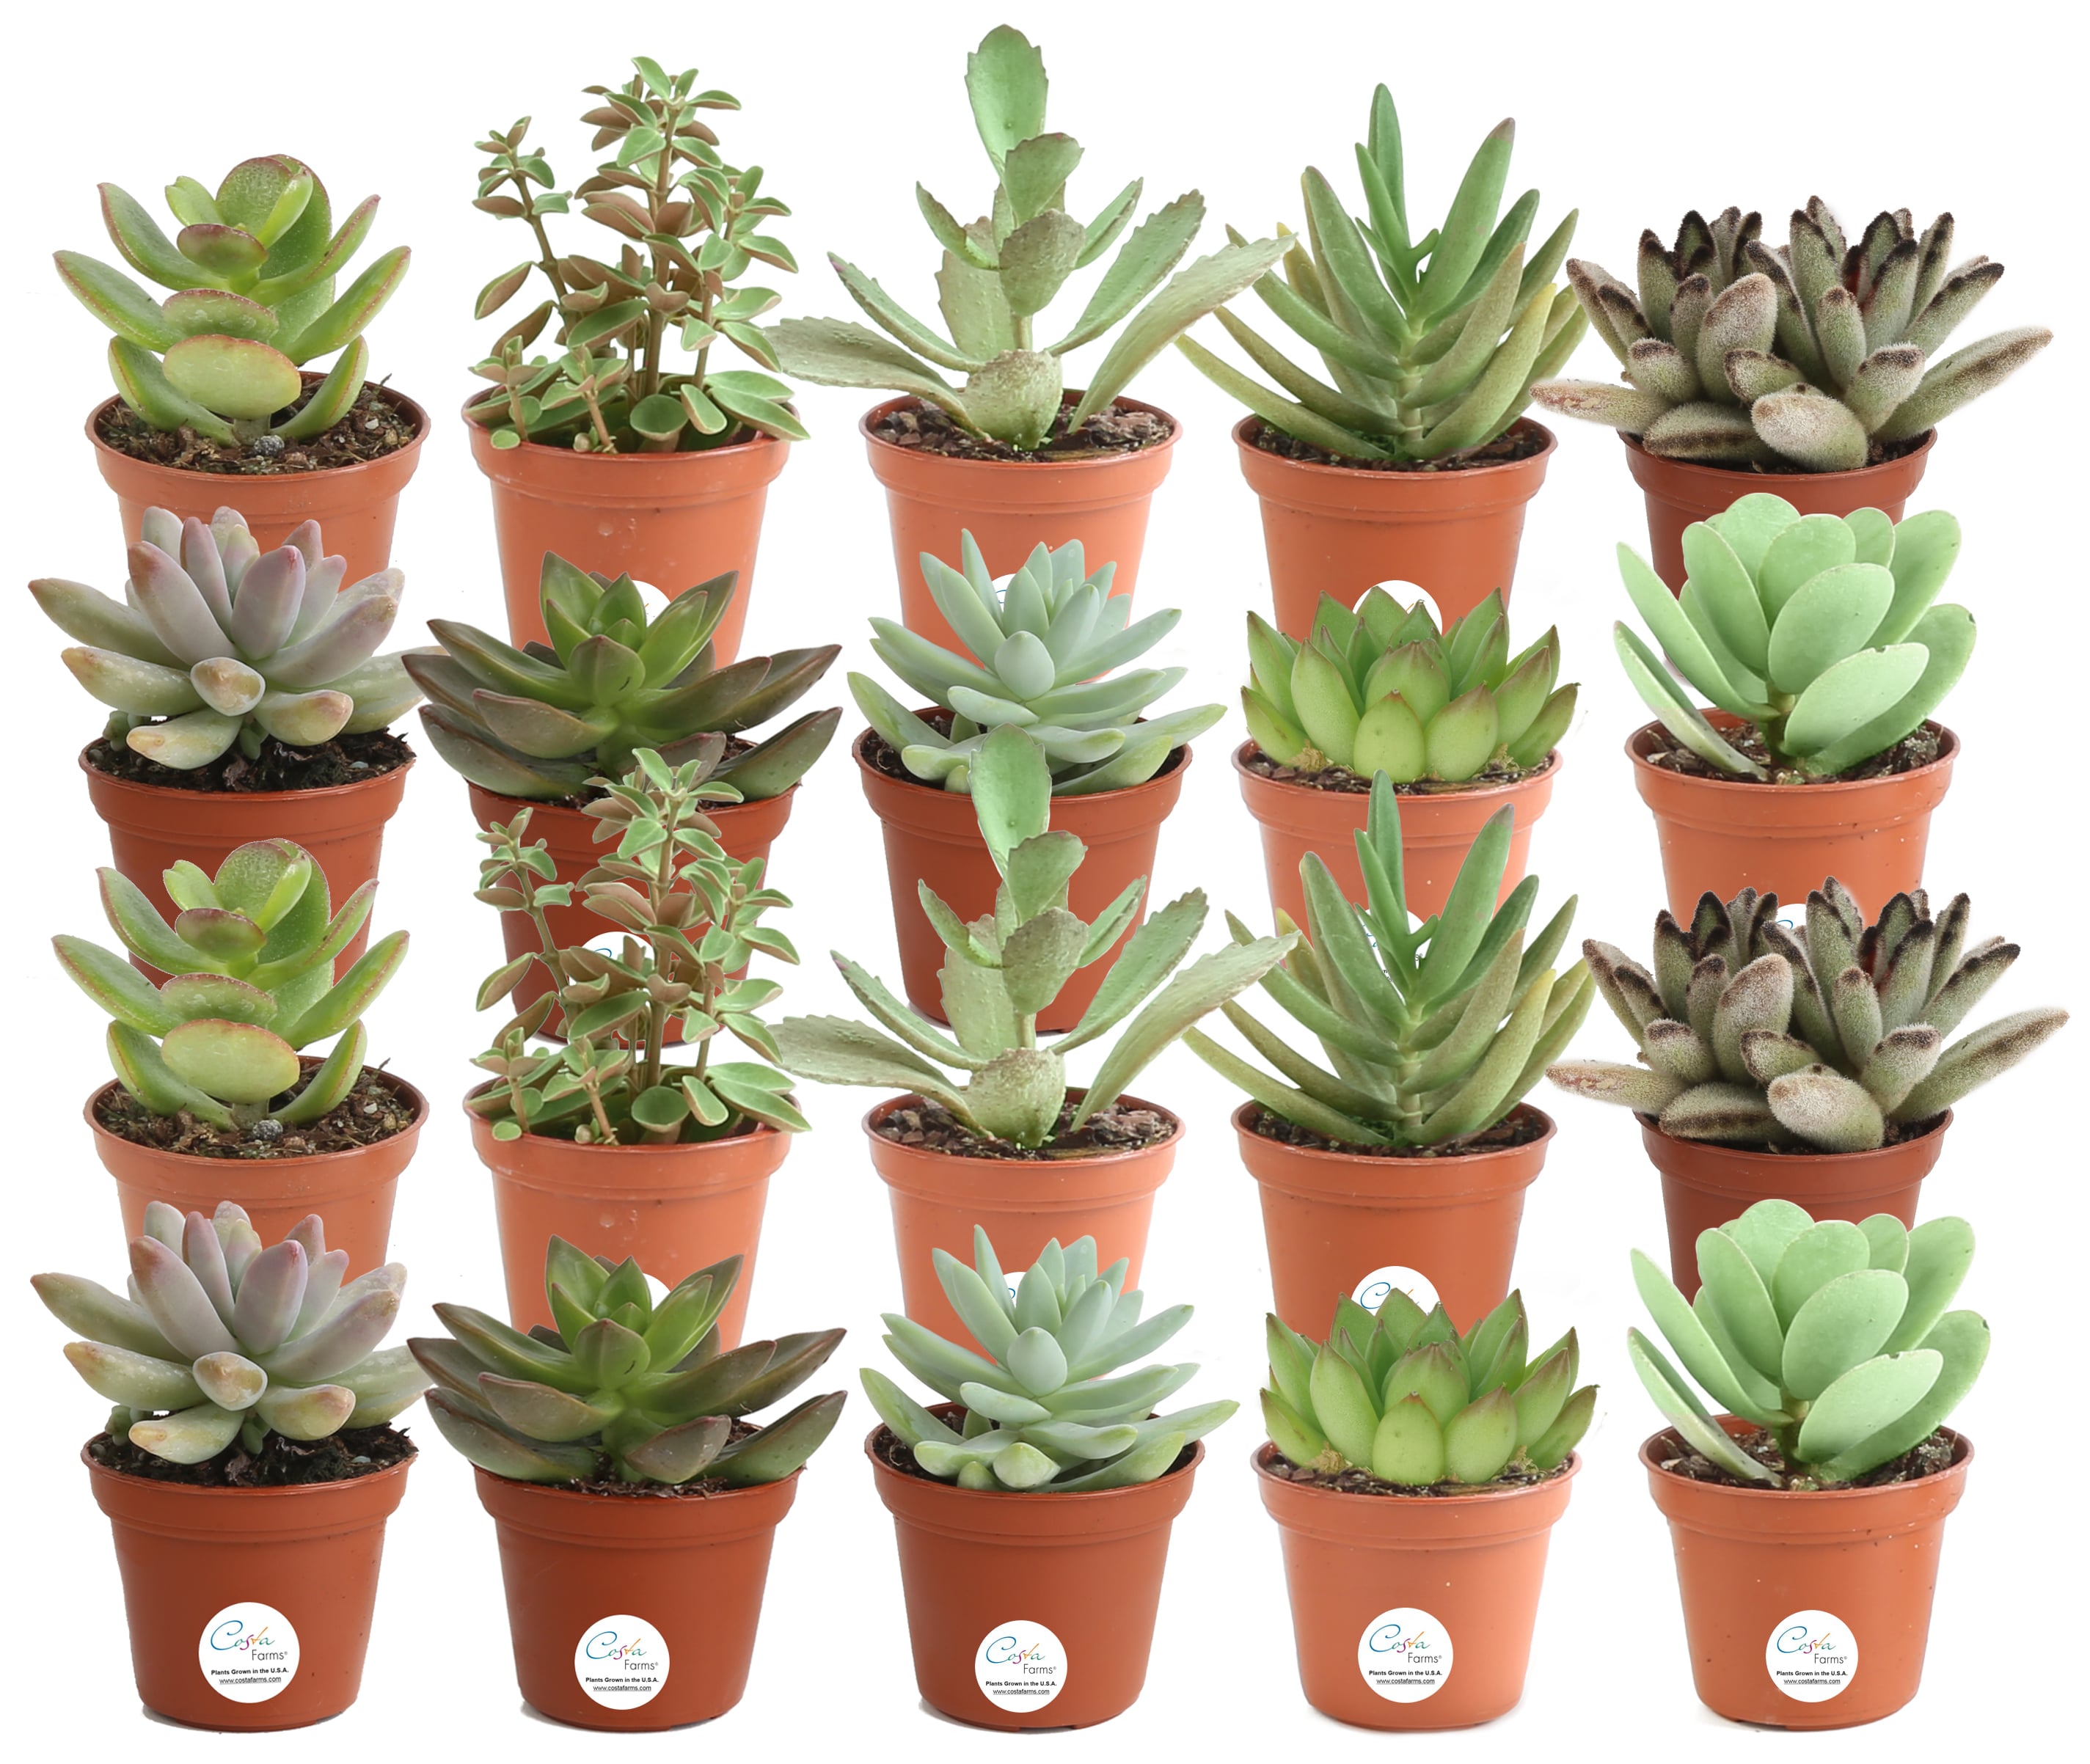 Costa Farms 20-Pack of Succulent for $28.68